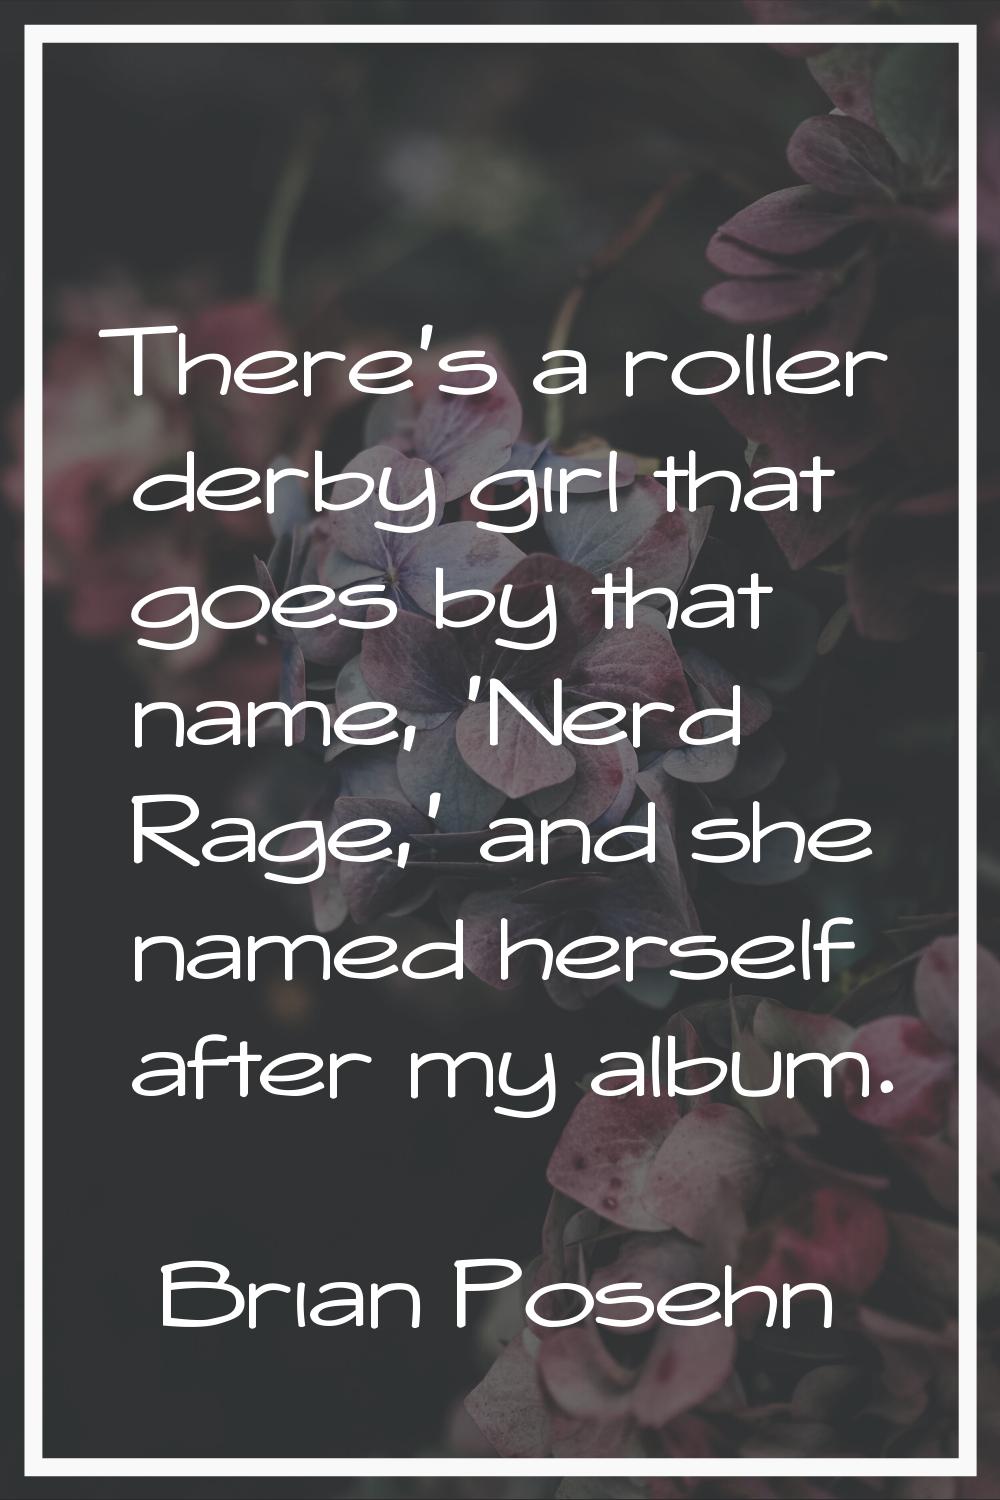 There's a roller derby girl that goes by that name, 'Nerd Rage,' and she named herself after my alb